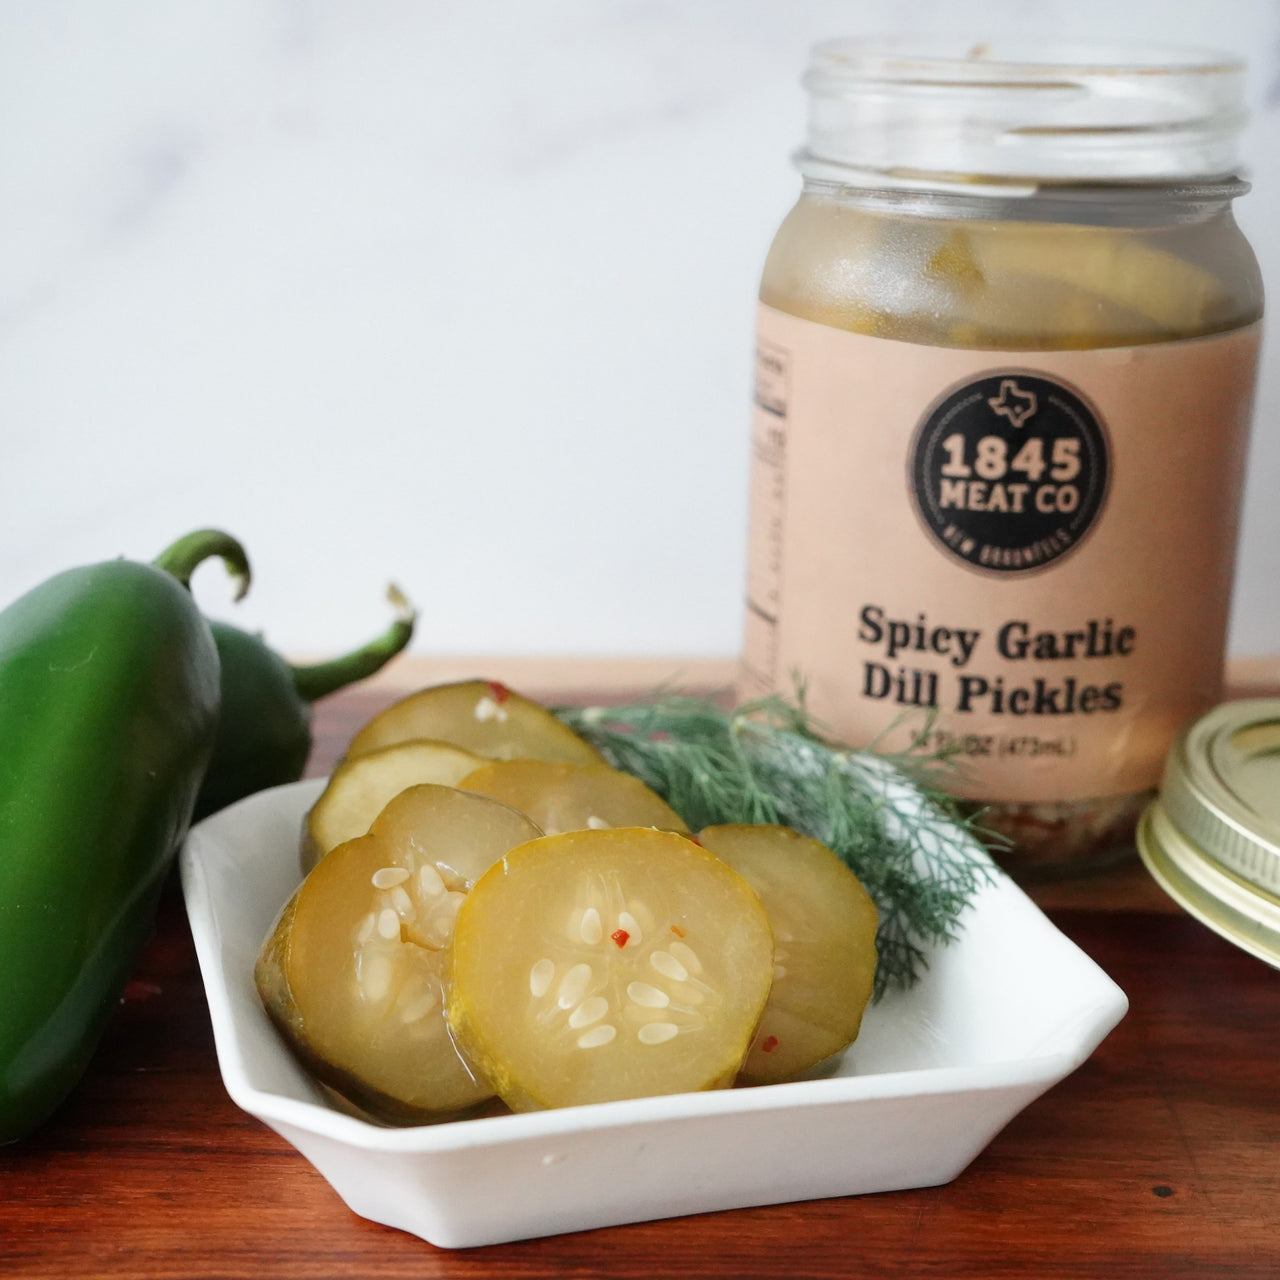 A wonderful, sliced pickle with just the right amount of spice and the added zip of garlic!